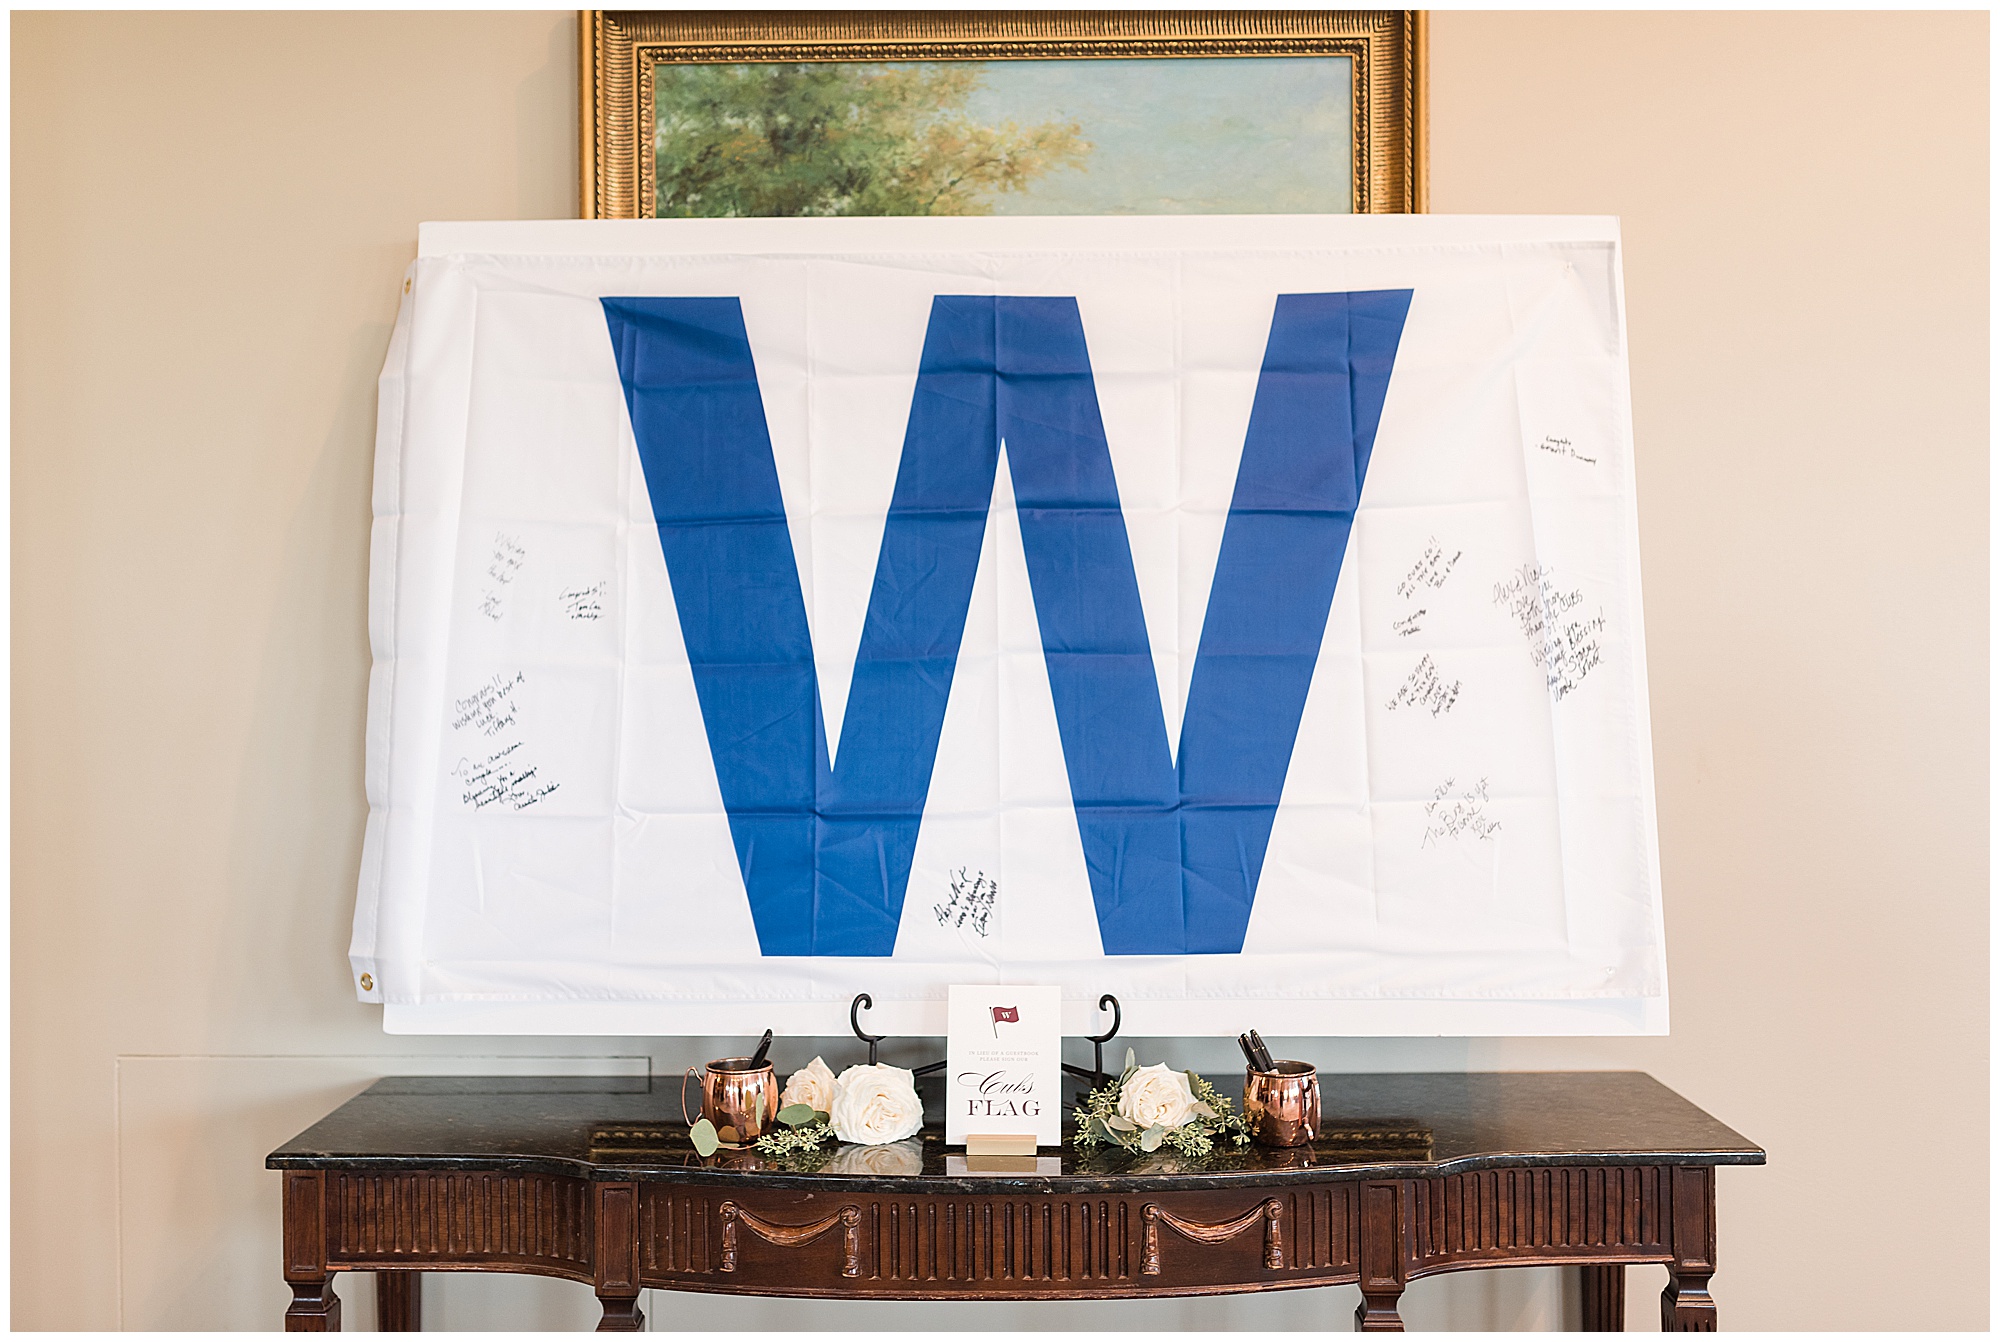 Chicago Cubs flag for guest to sign.